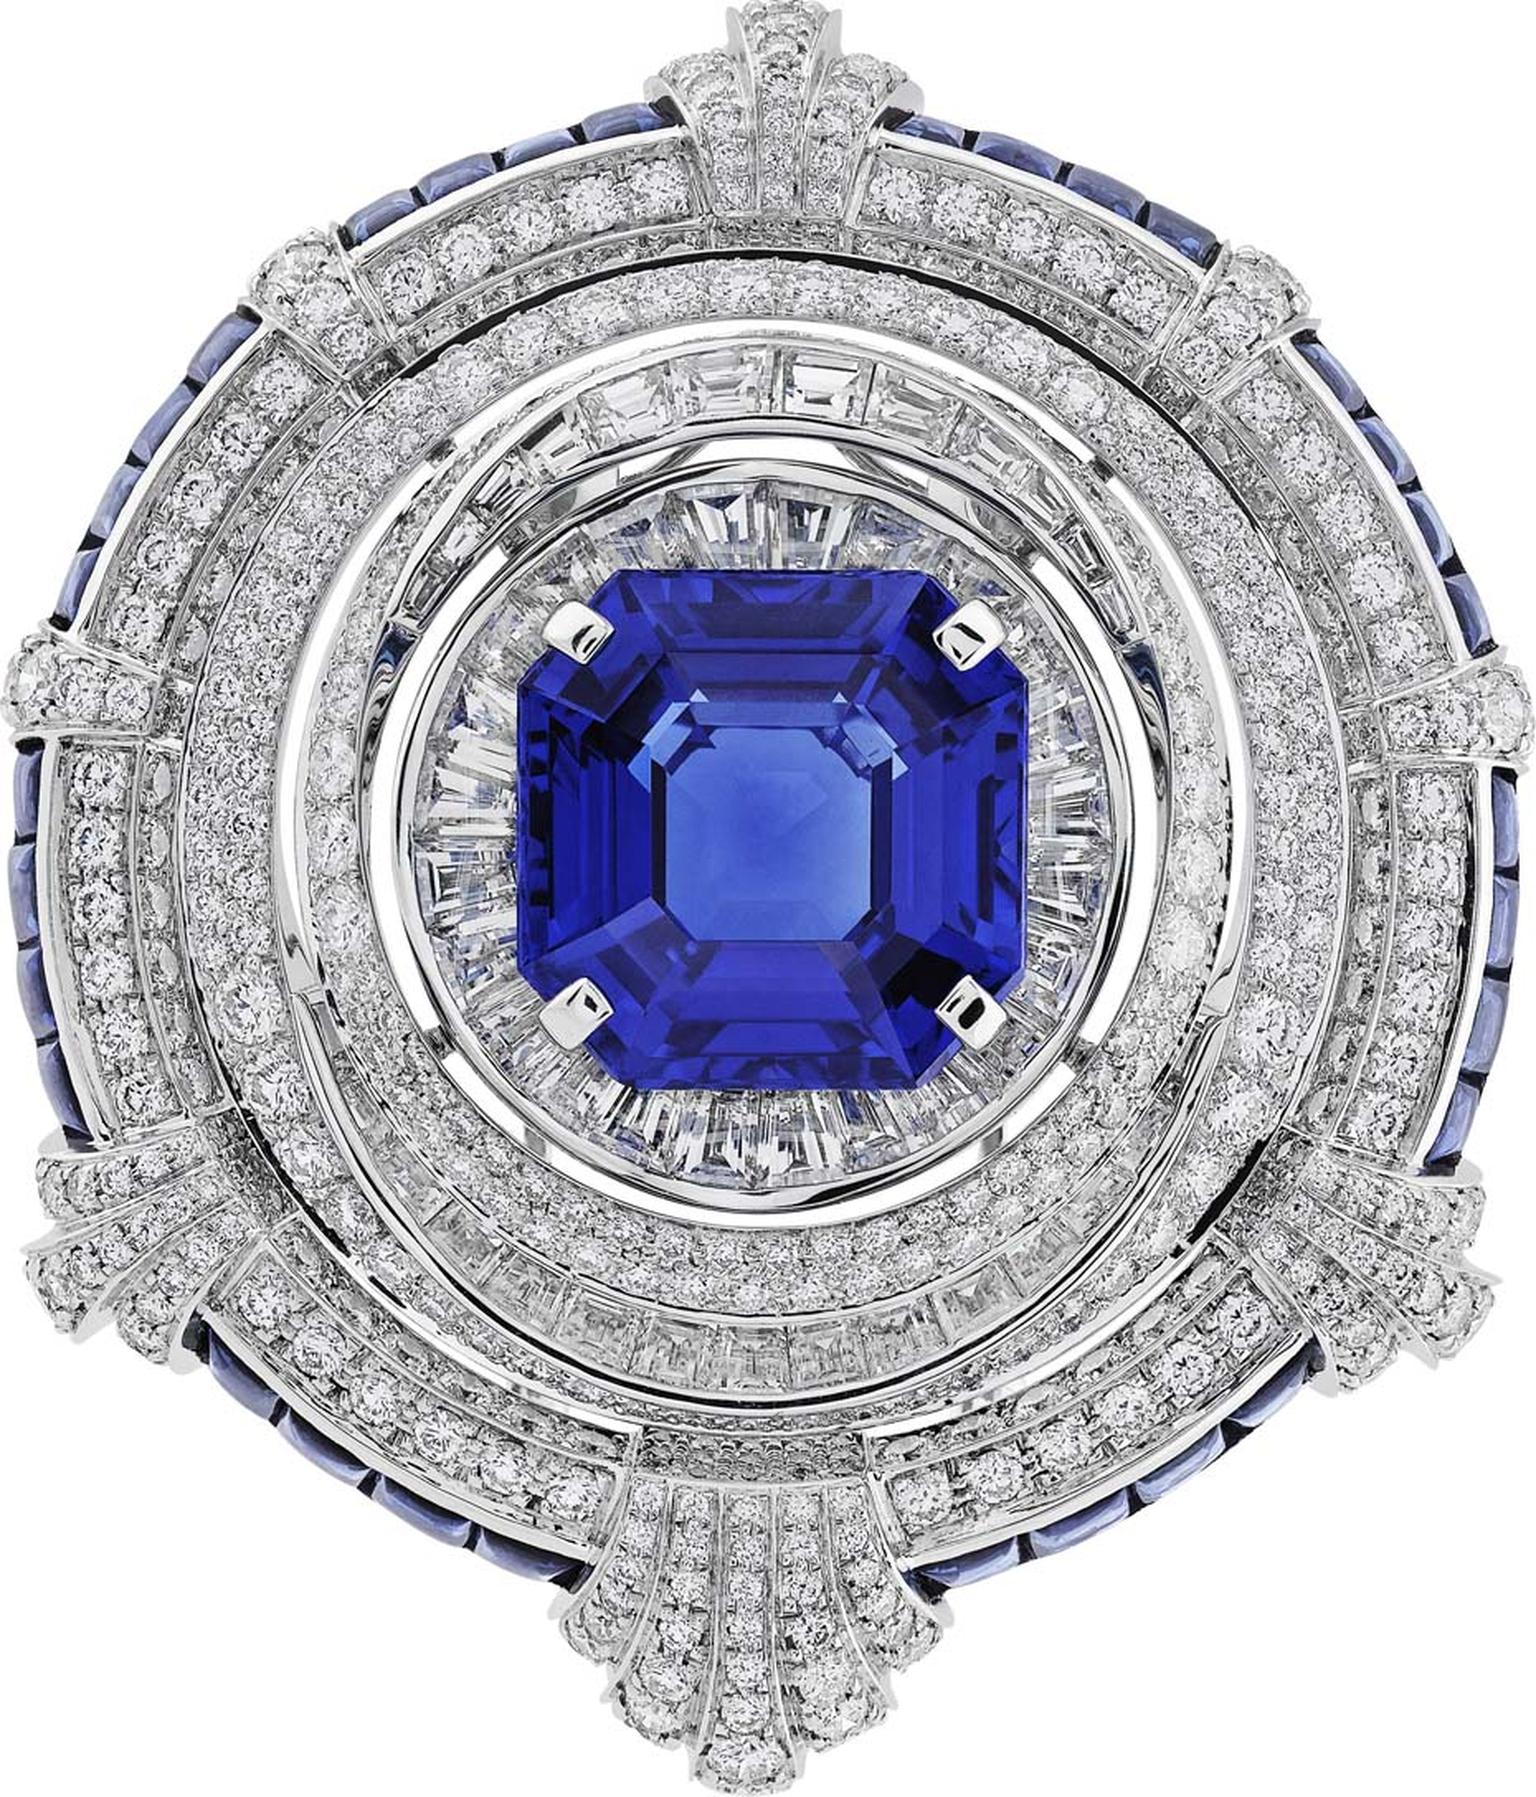 Van Cleef & Arpels Peau d'Âne collection Enchated Forest white gold detachable brooch with mixed-cut white diamonds surrounding an octagonal 24.77ct sapphire.